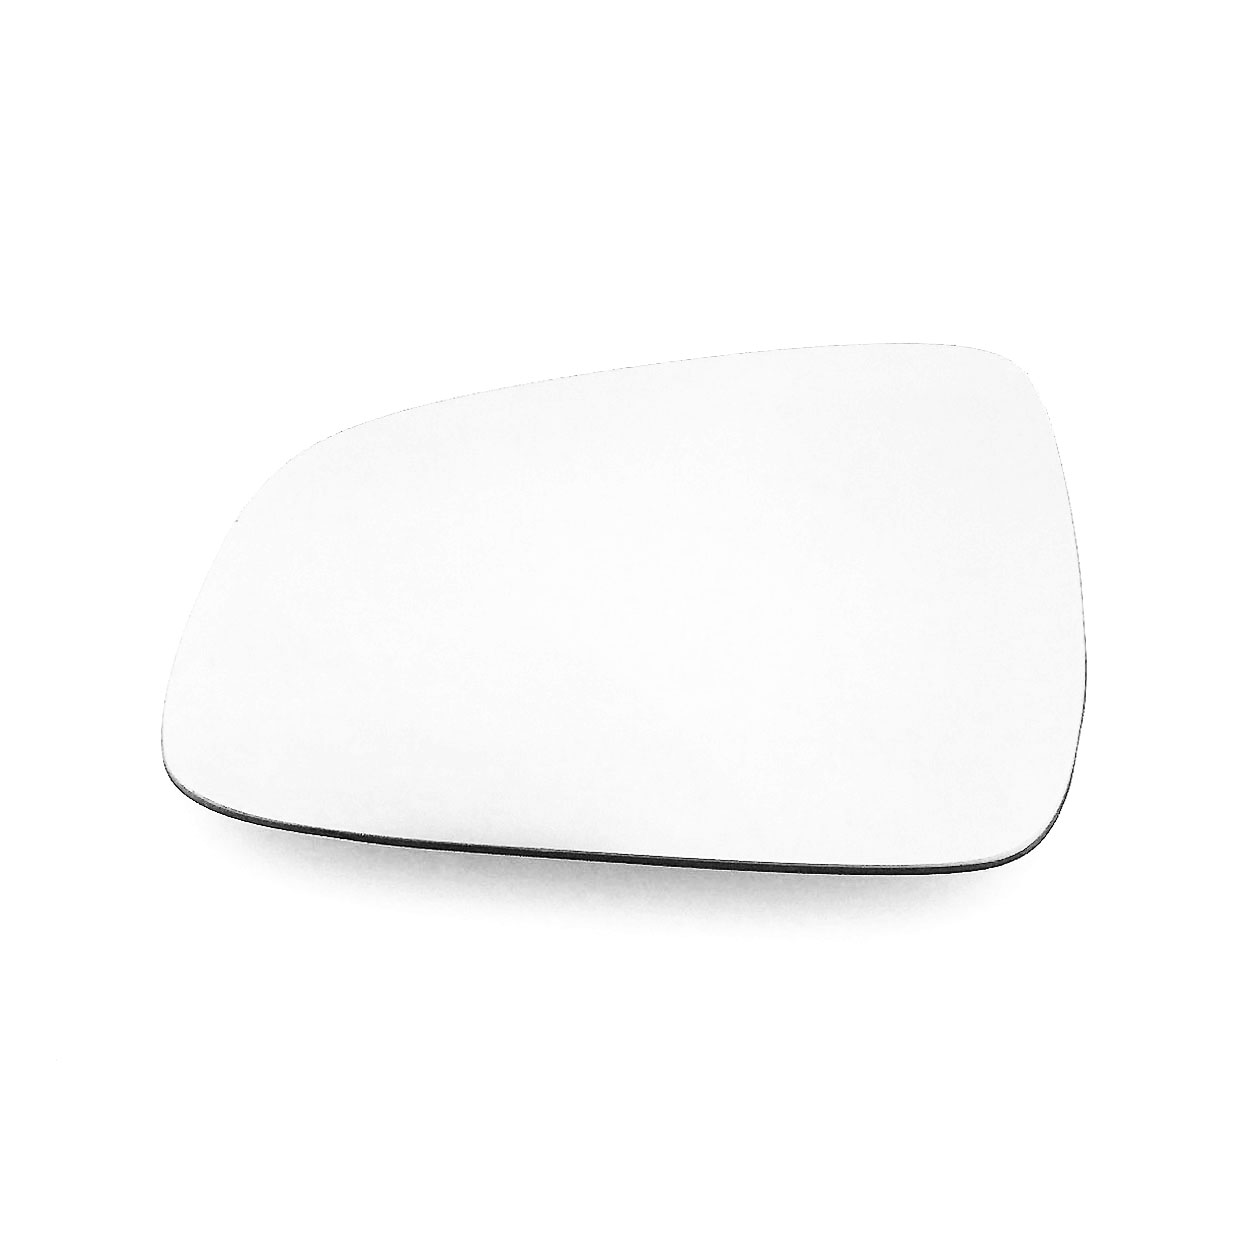 Toyota Corolla Wing Mirror Glass LEFT HAND ( UK Passenger Side ) 2017 to 2021 – Convex Wing Mirror